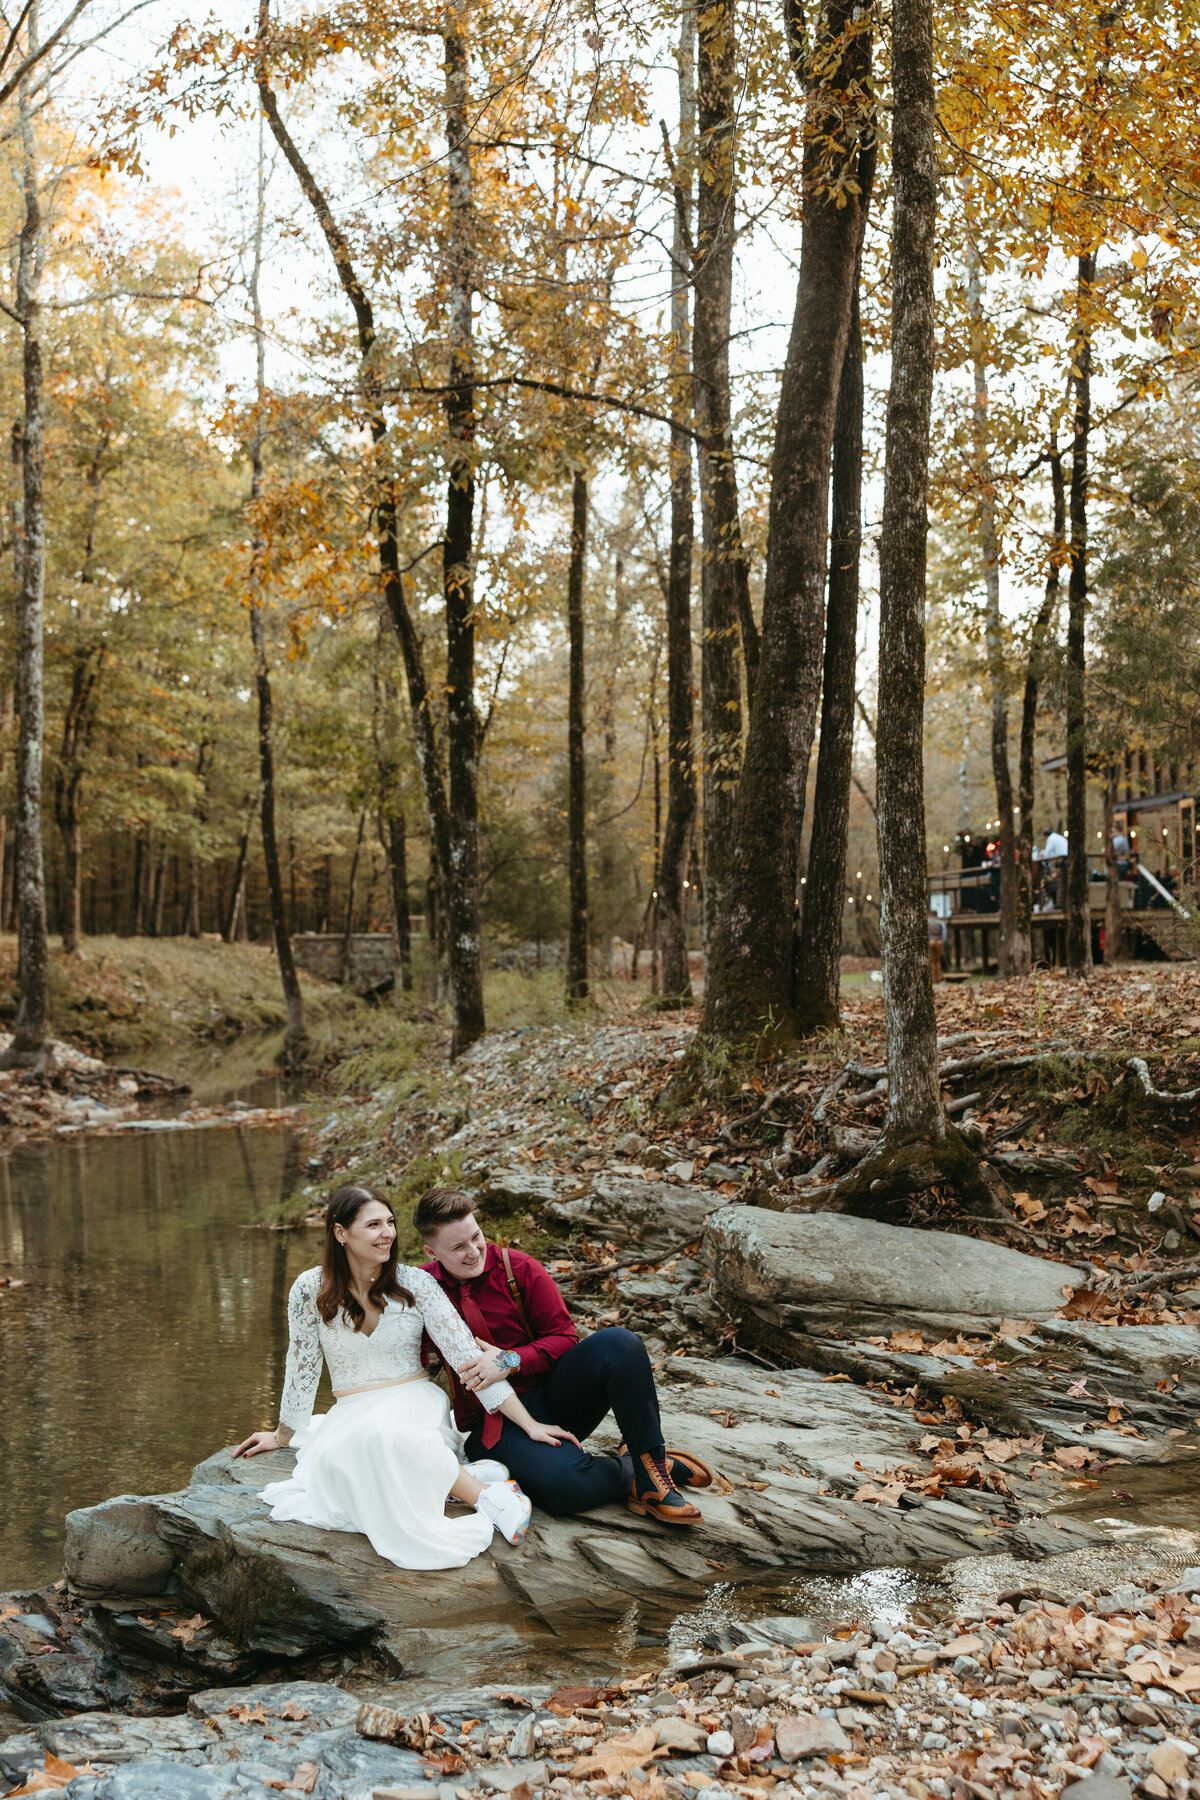 Couple seated on a rock by a creek surrounded by autumn trees